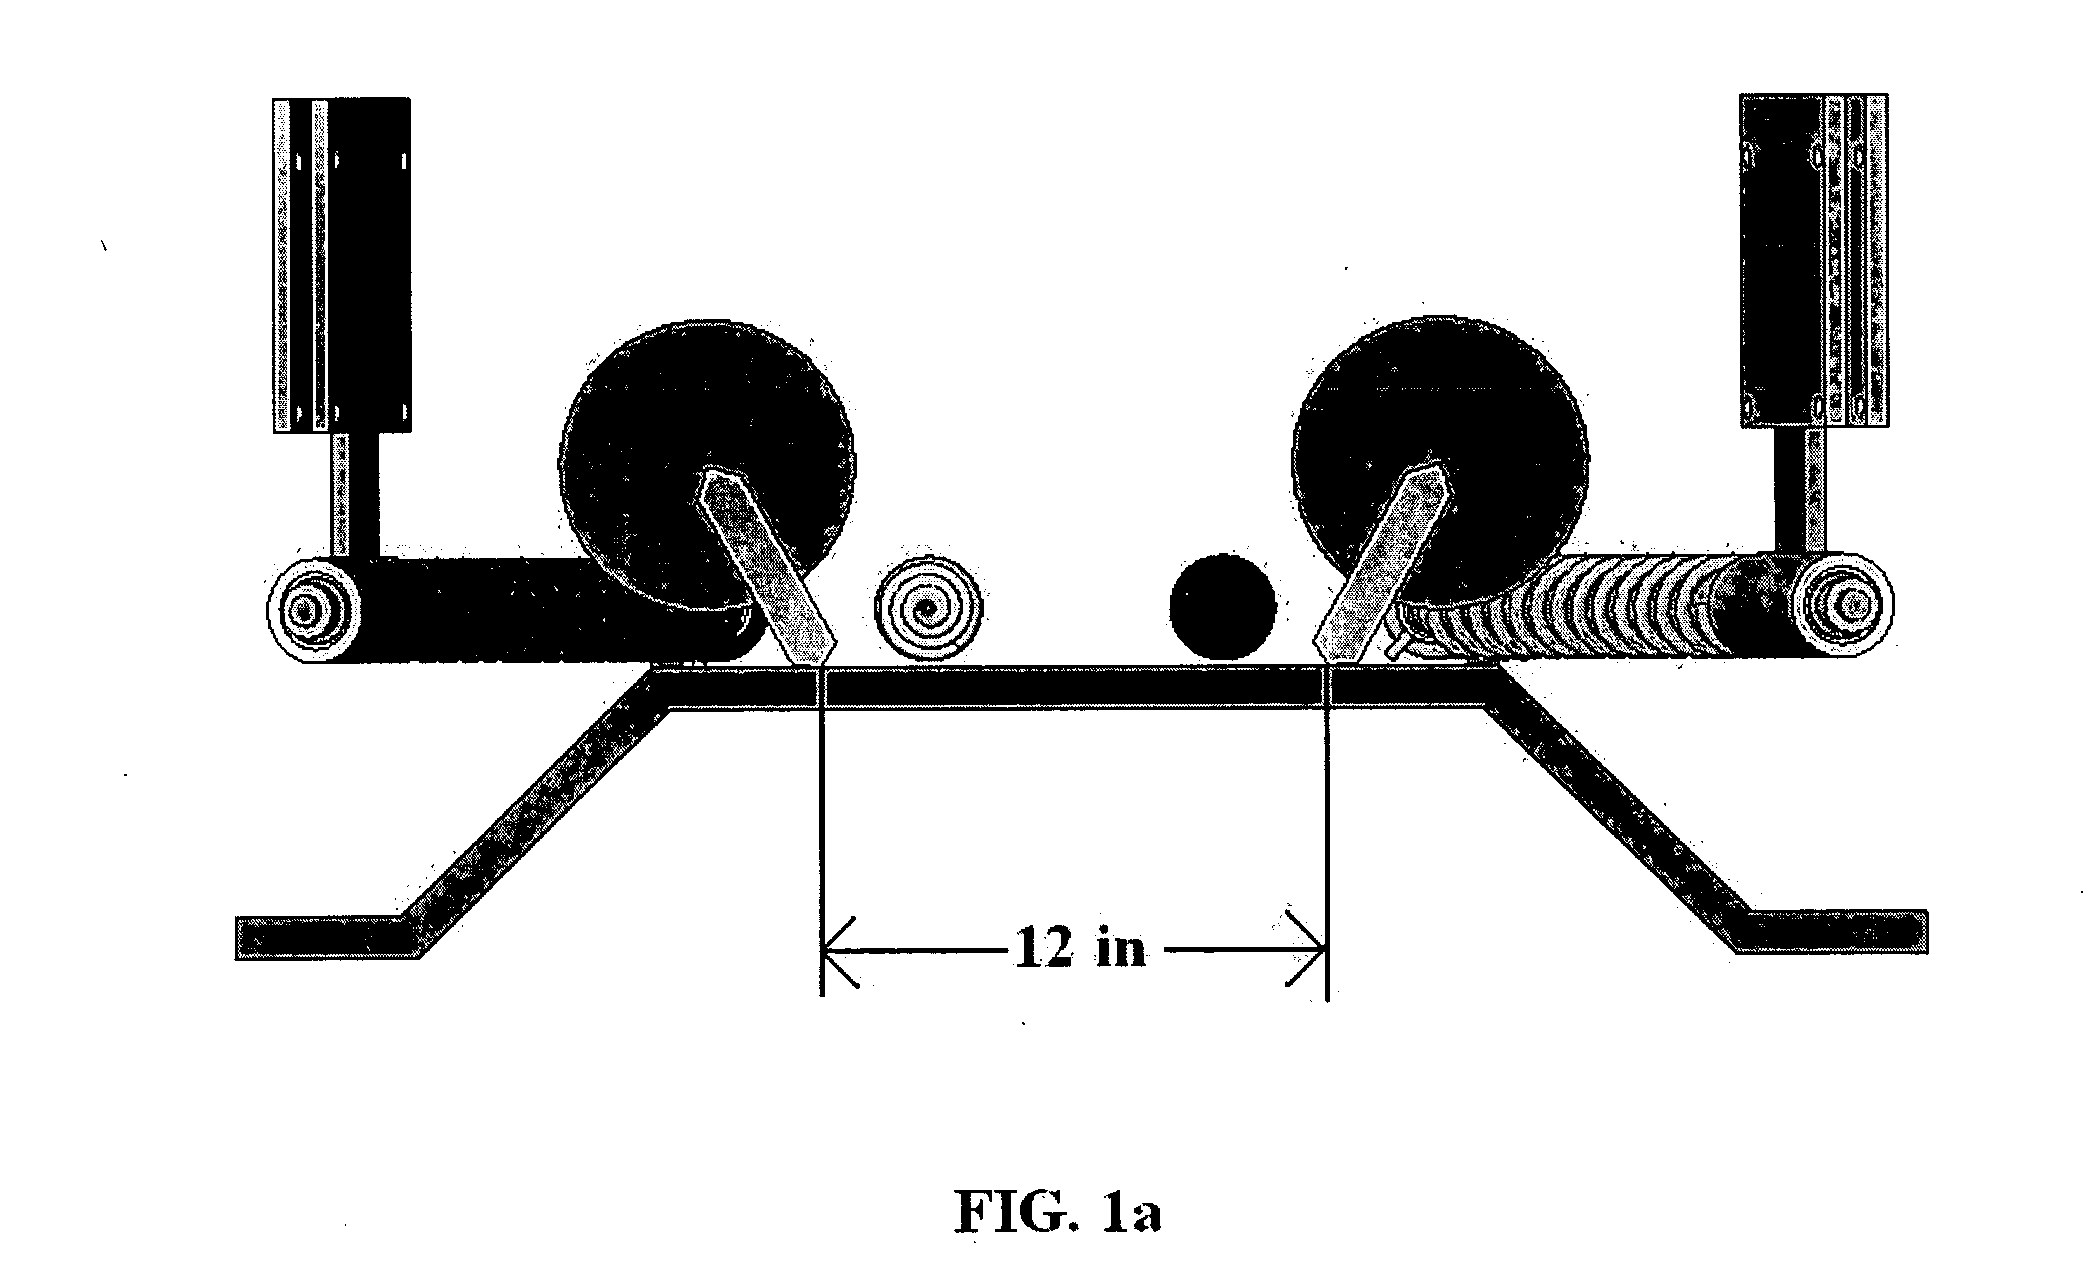 Systems and methods for automatically picking and coring lettuce and cabbage